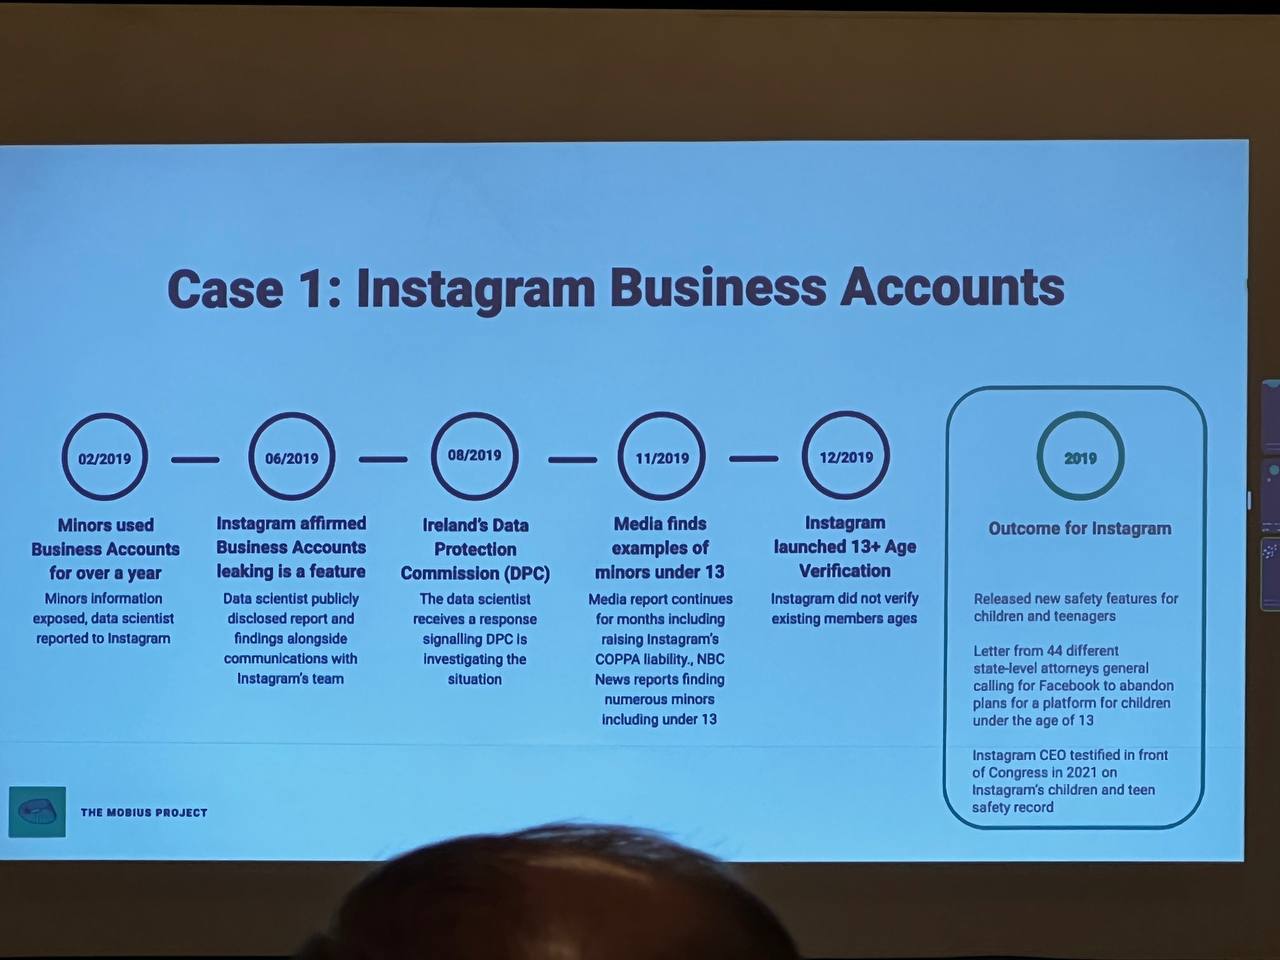 A diagram about how instagram business accounts were abused by minors.